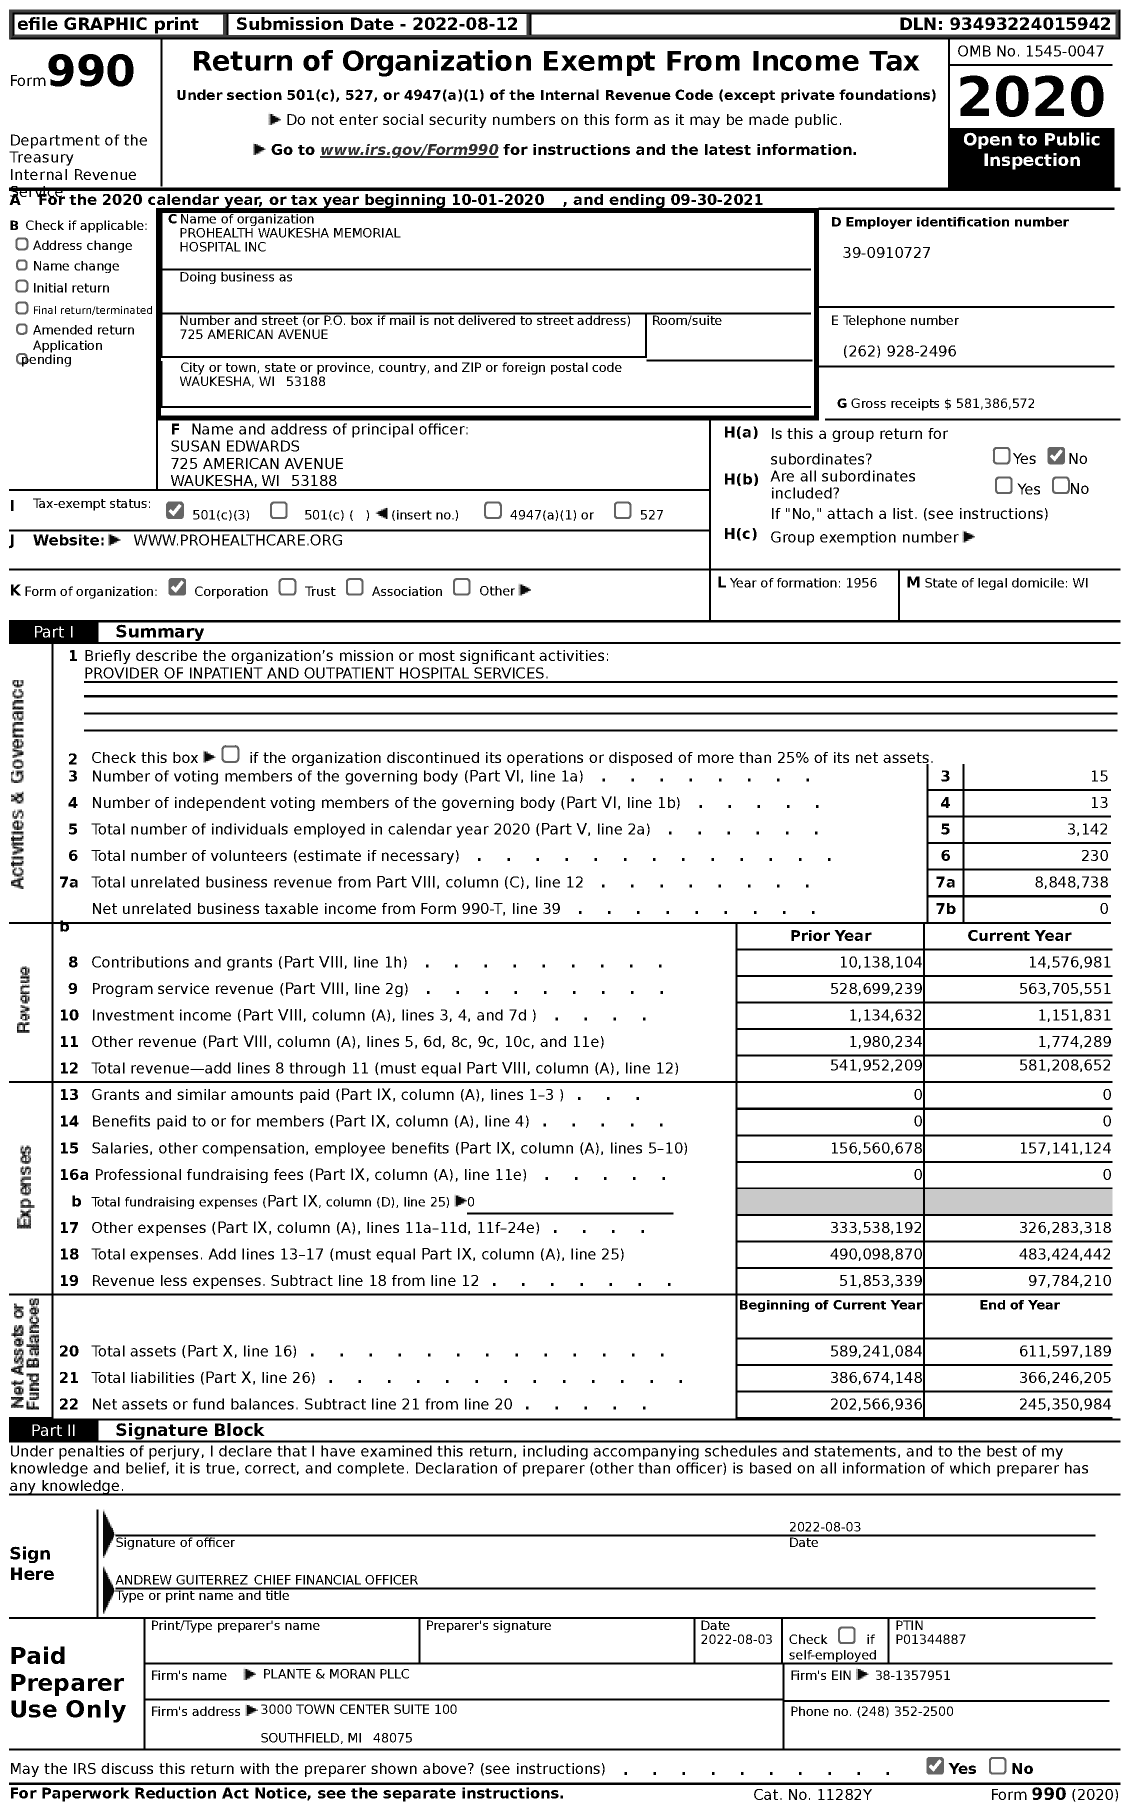 Image of first page of 2020 Form 990 for Prohealth Waukesha Memorial Hospital (WMH)